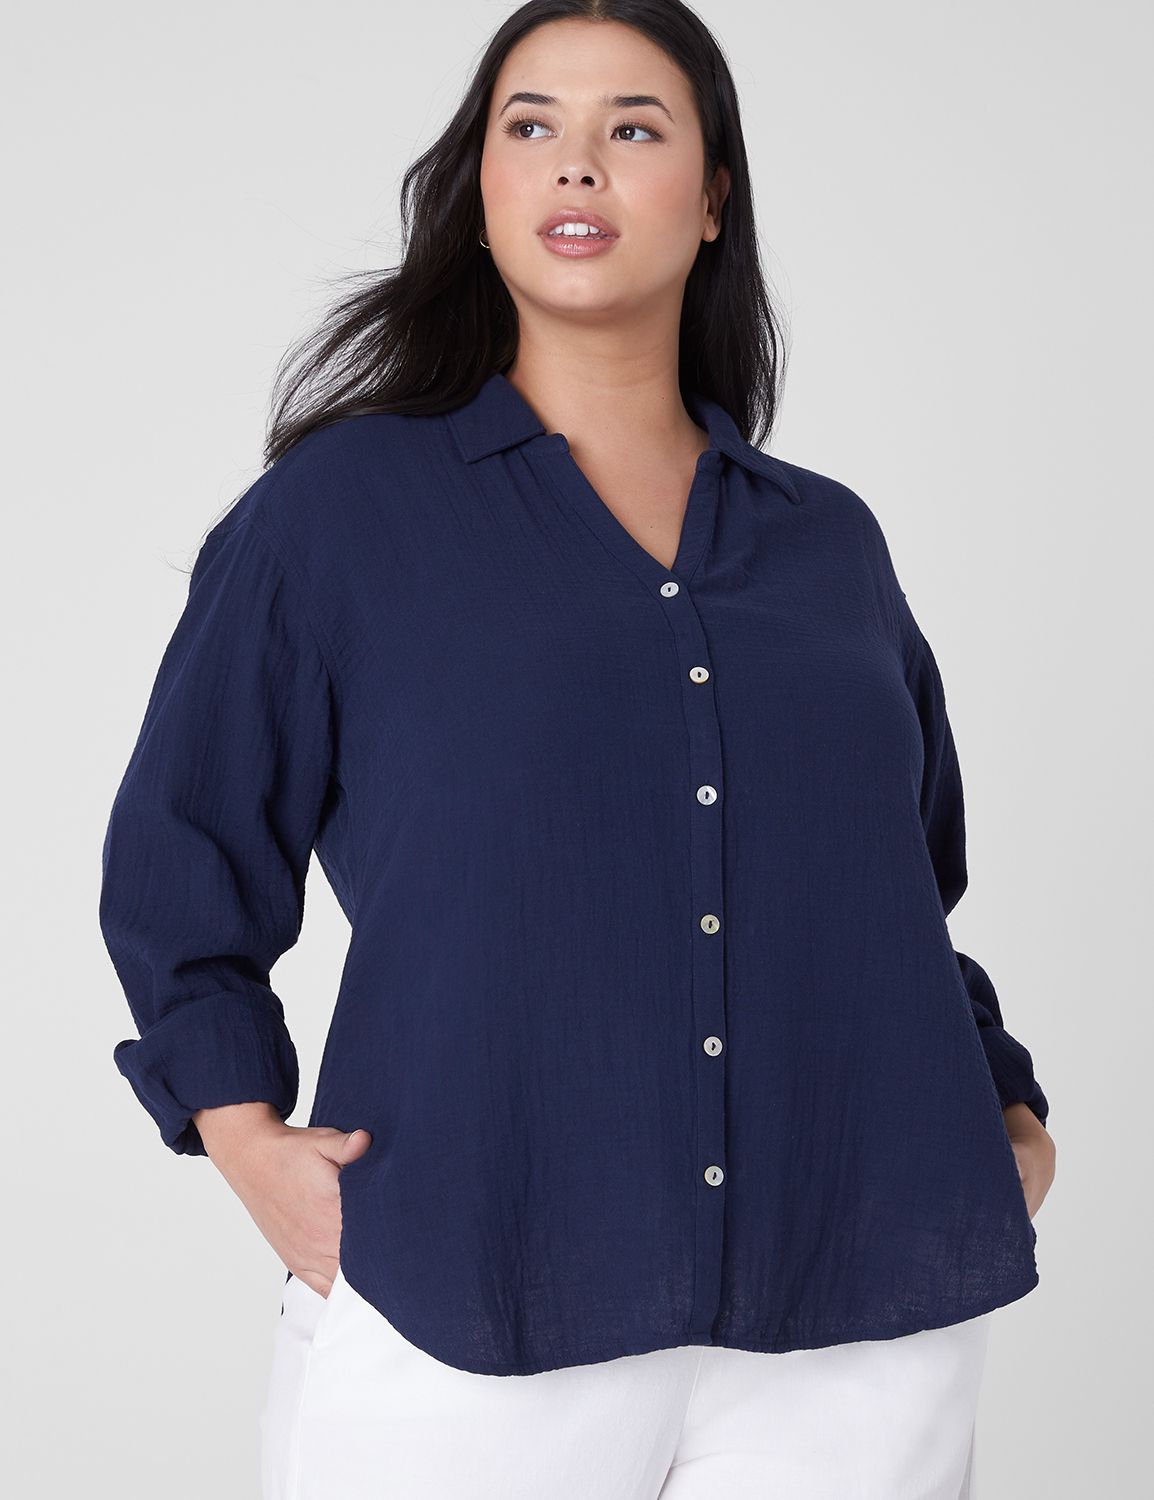 Classic Long Sleeve Button Down Bea | LaneBryant